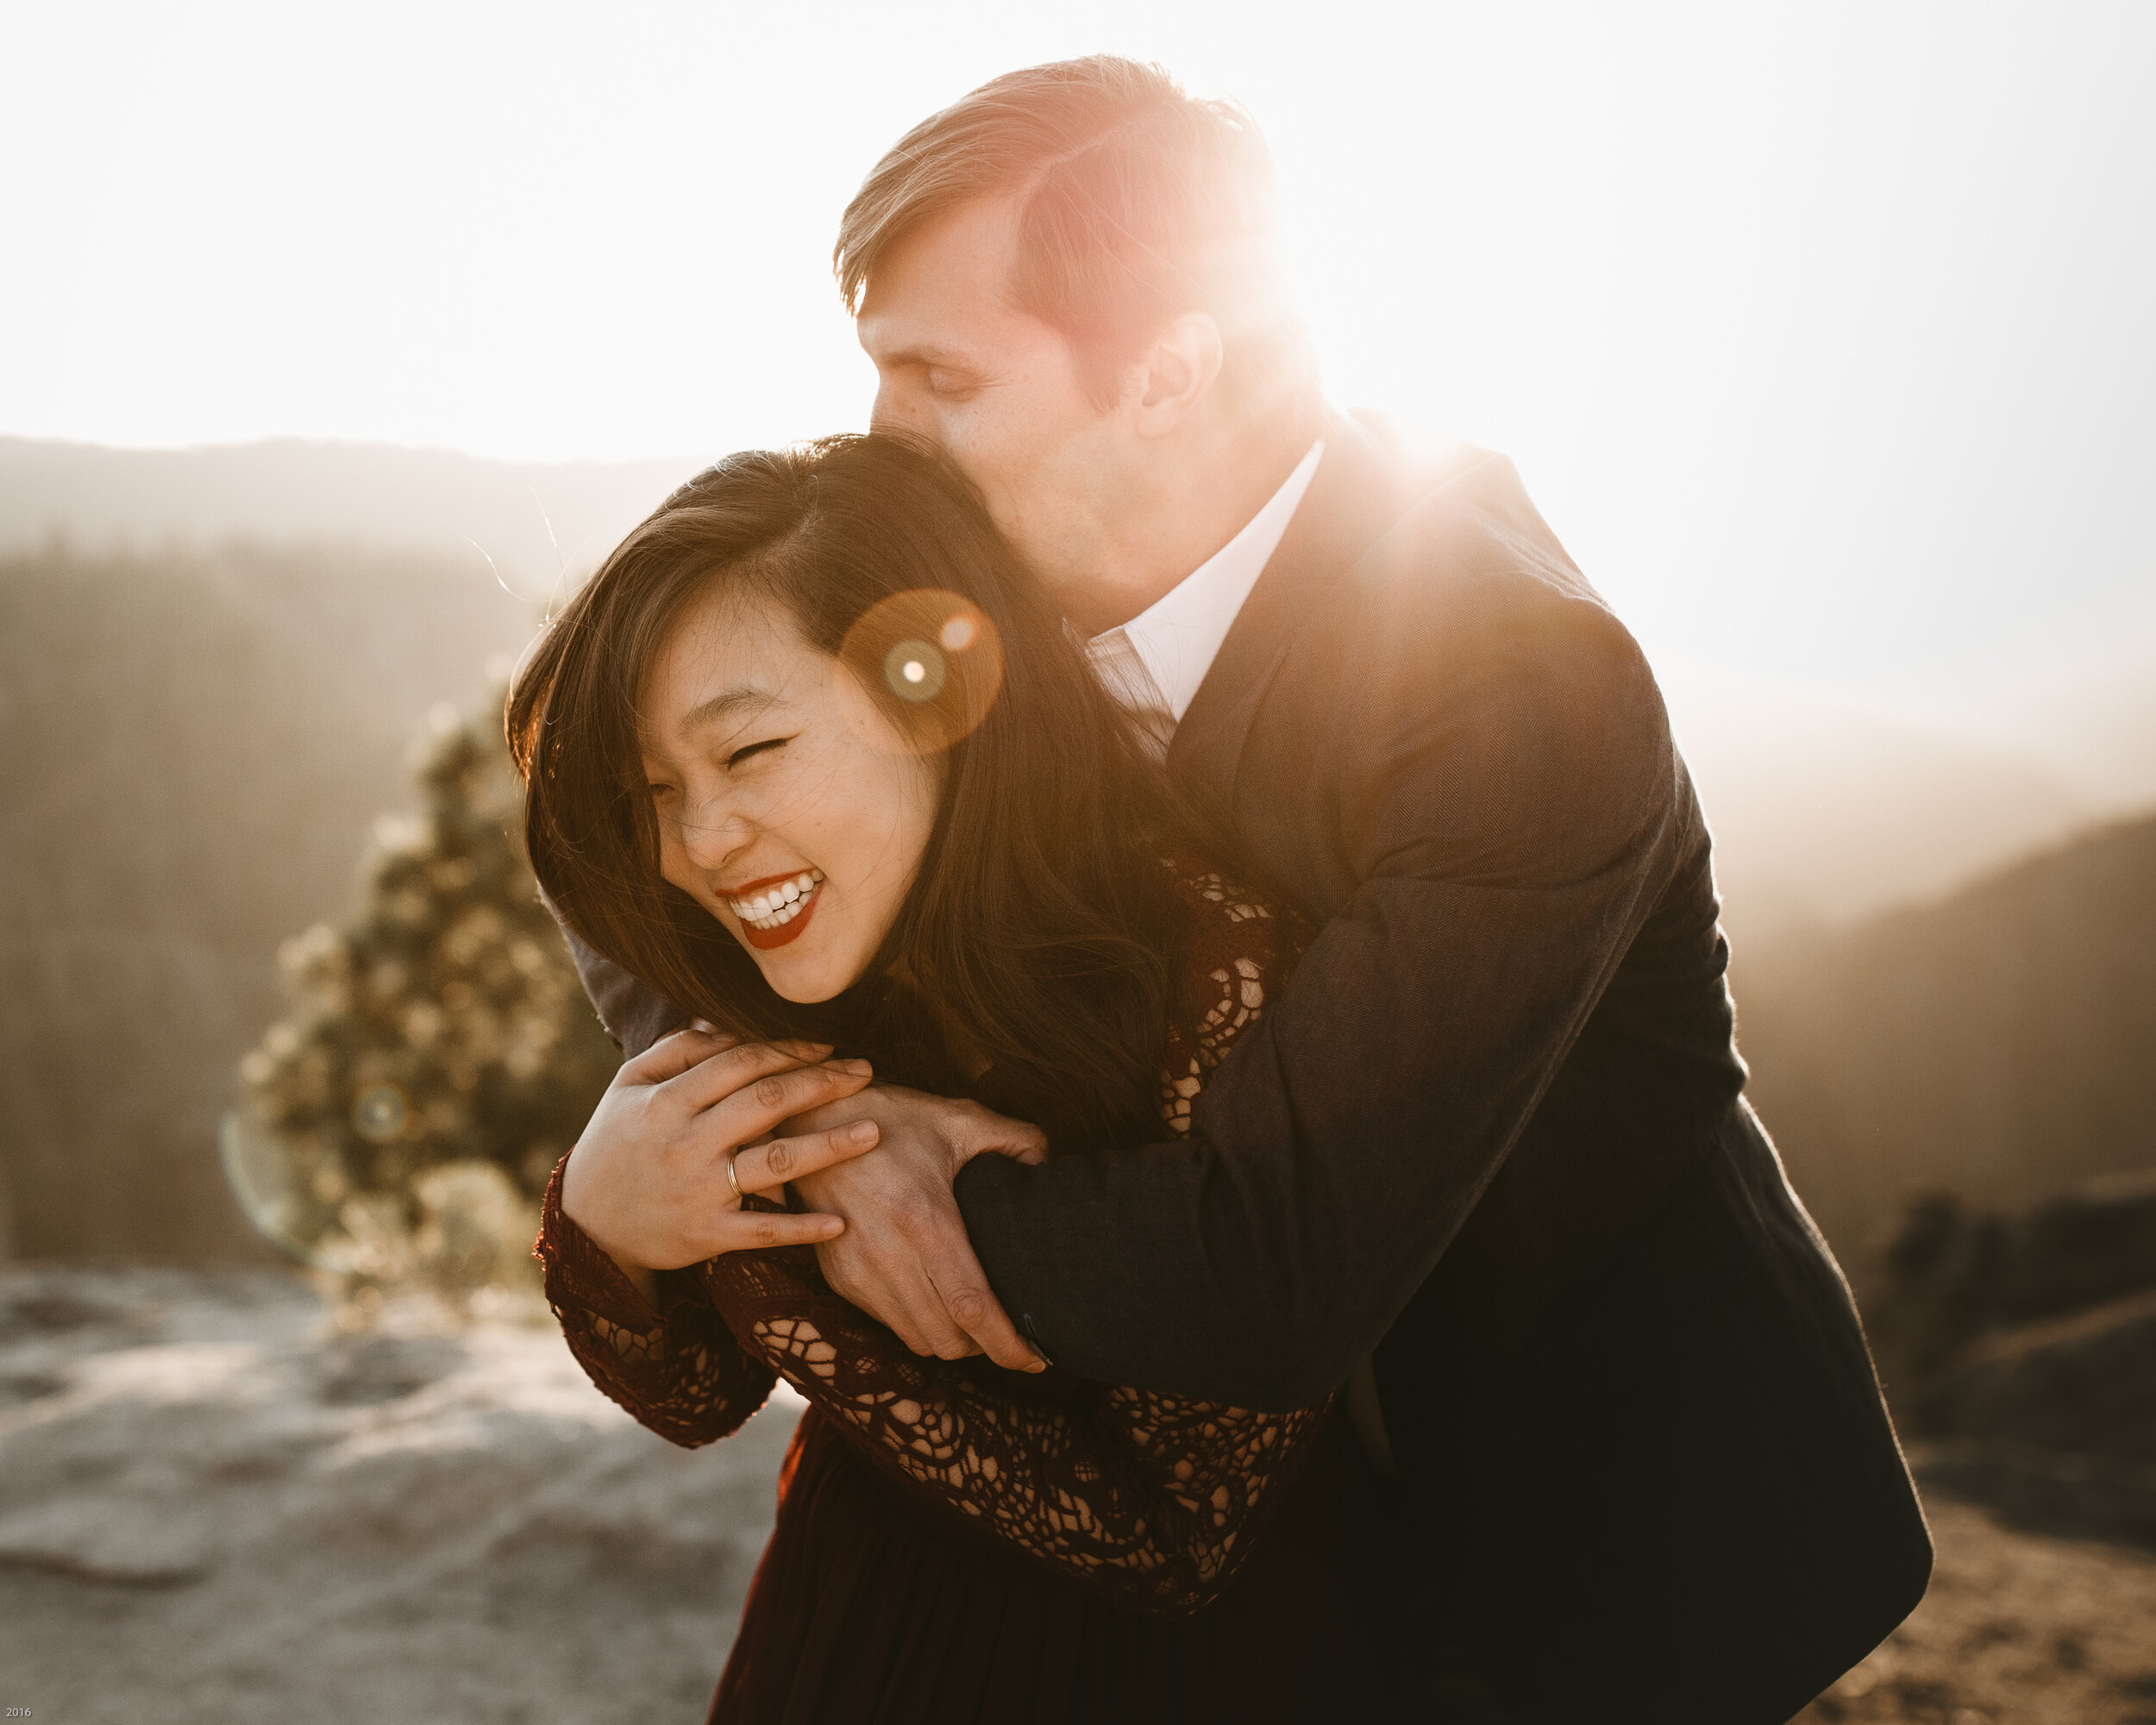 yosemite-national-park-couples-session-at-taft-point-and-yosemite-valley-yosemite-elopement-photographer-nicole-daacke-photography-138.jpg